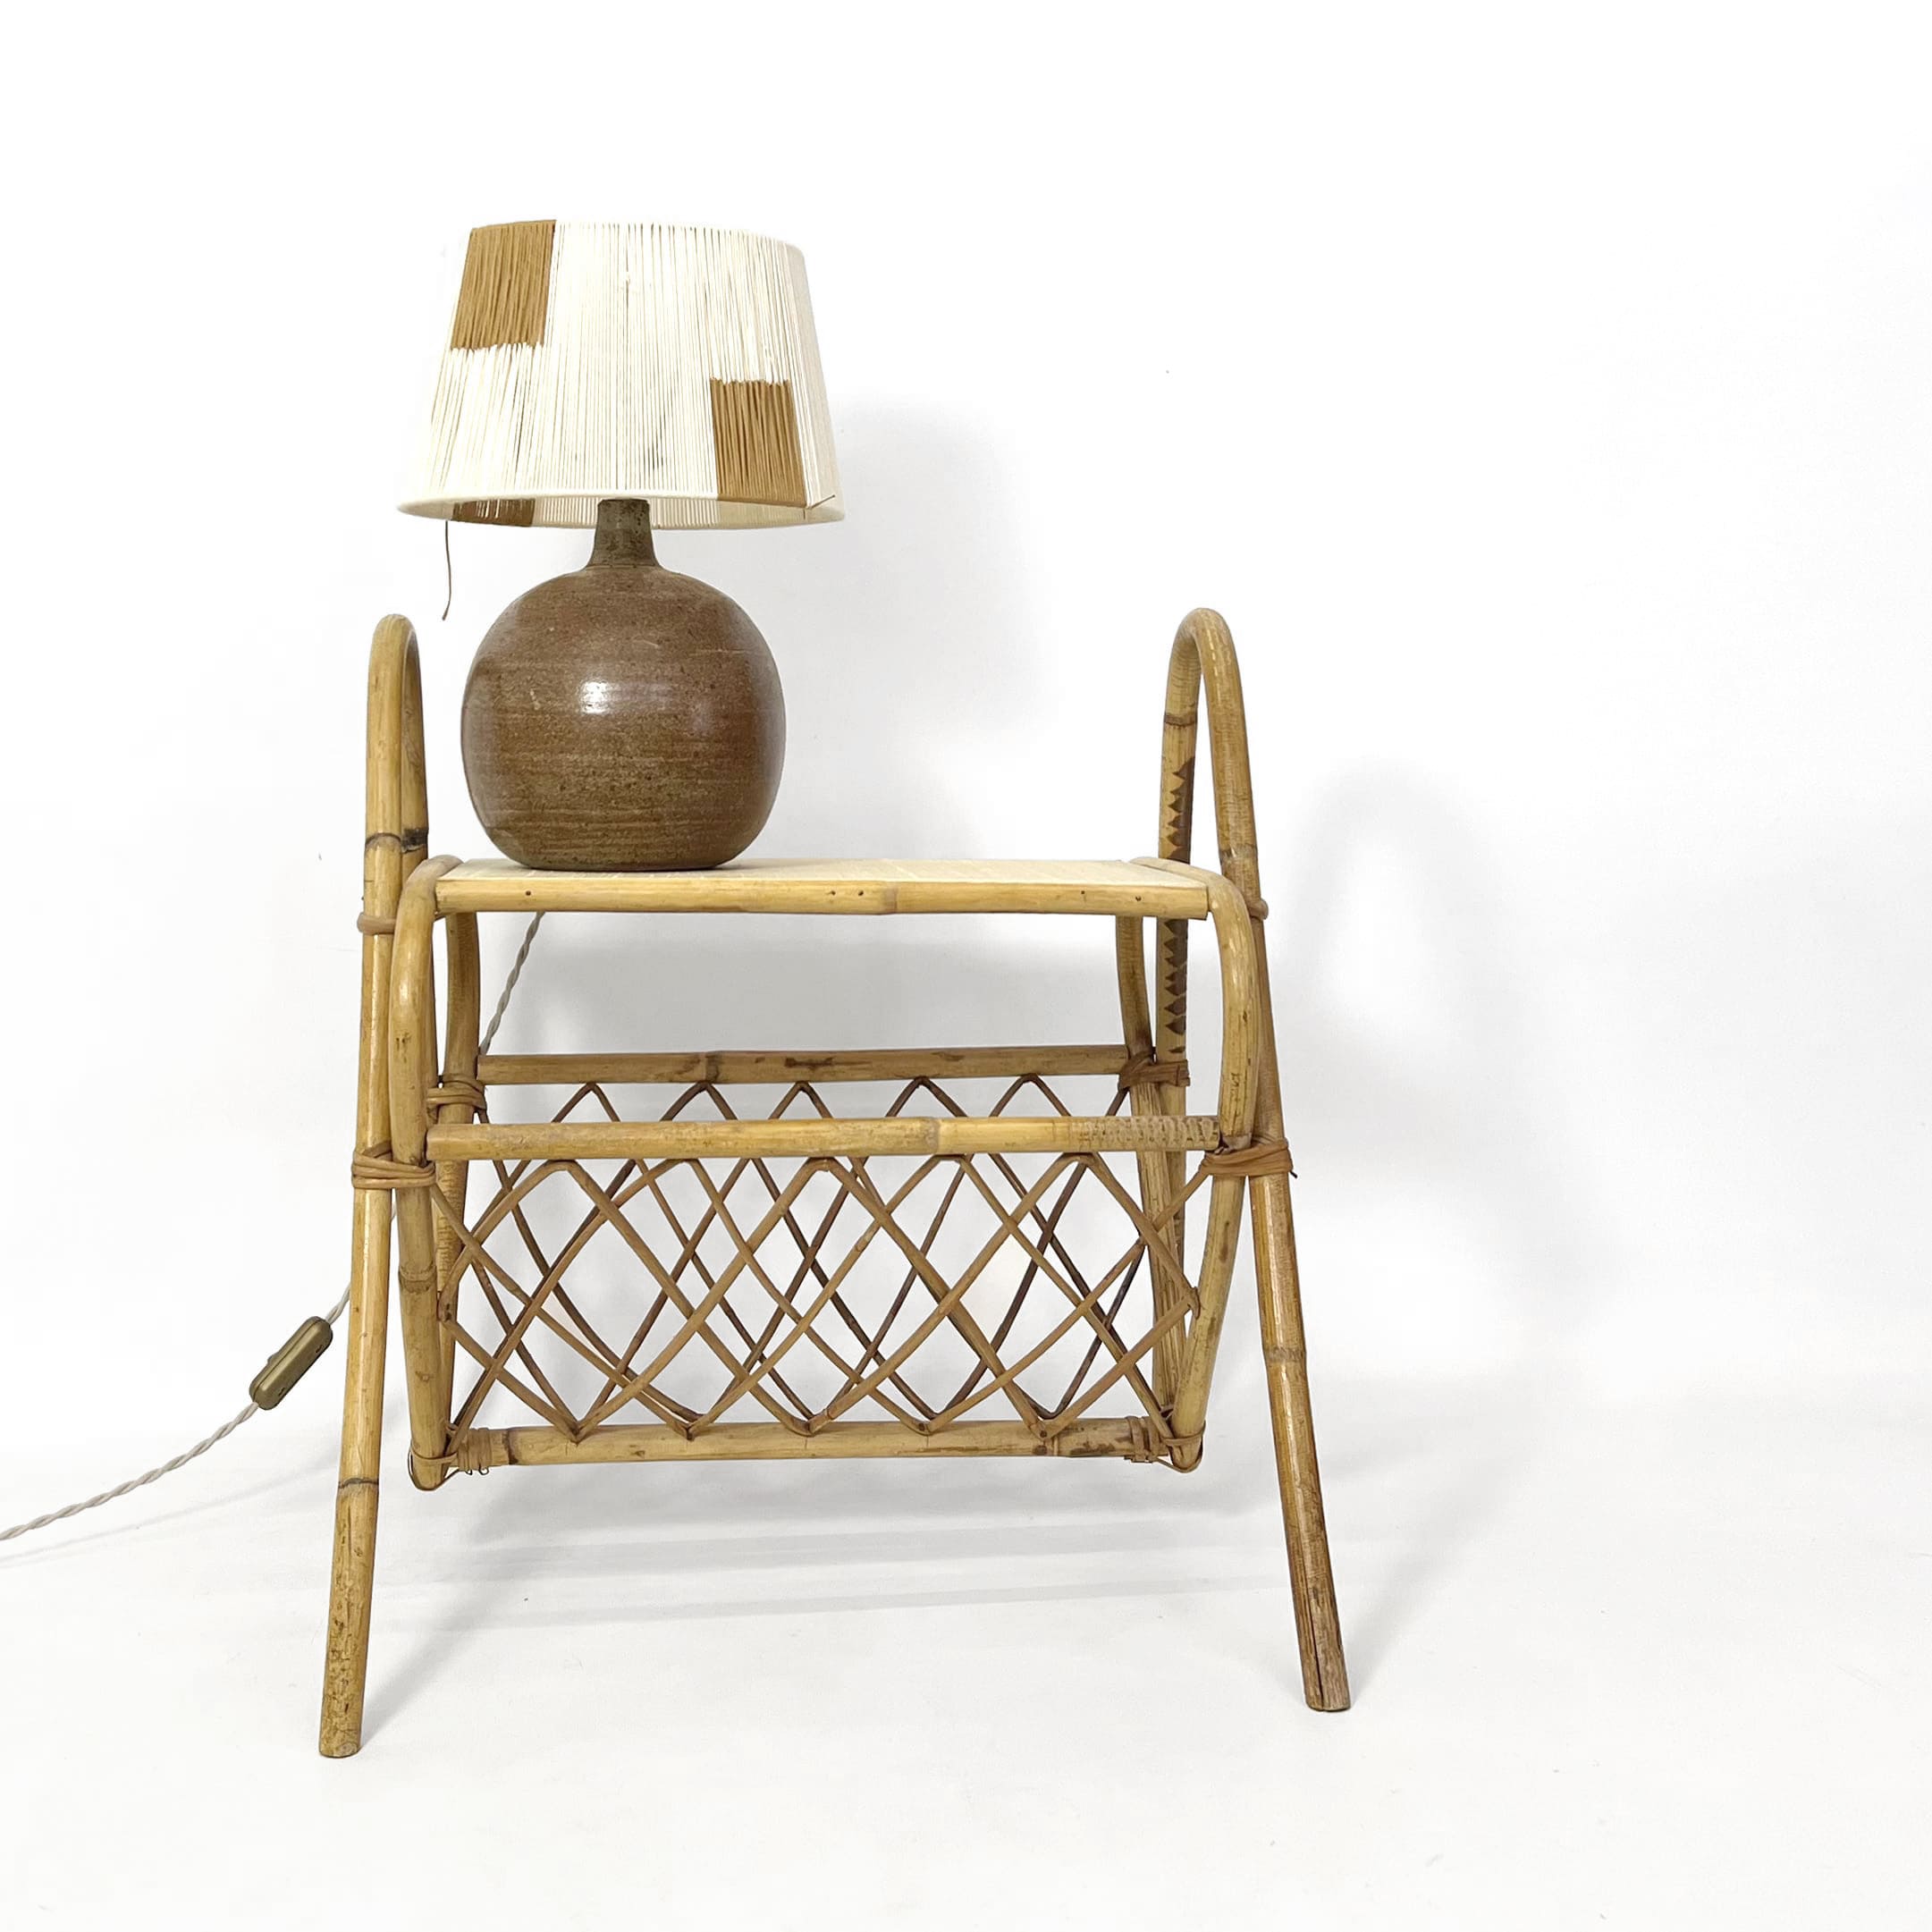 French rattan bedside table from the 1960’s-1970’s.